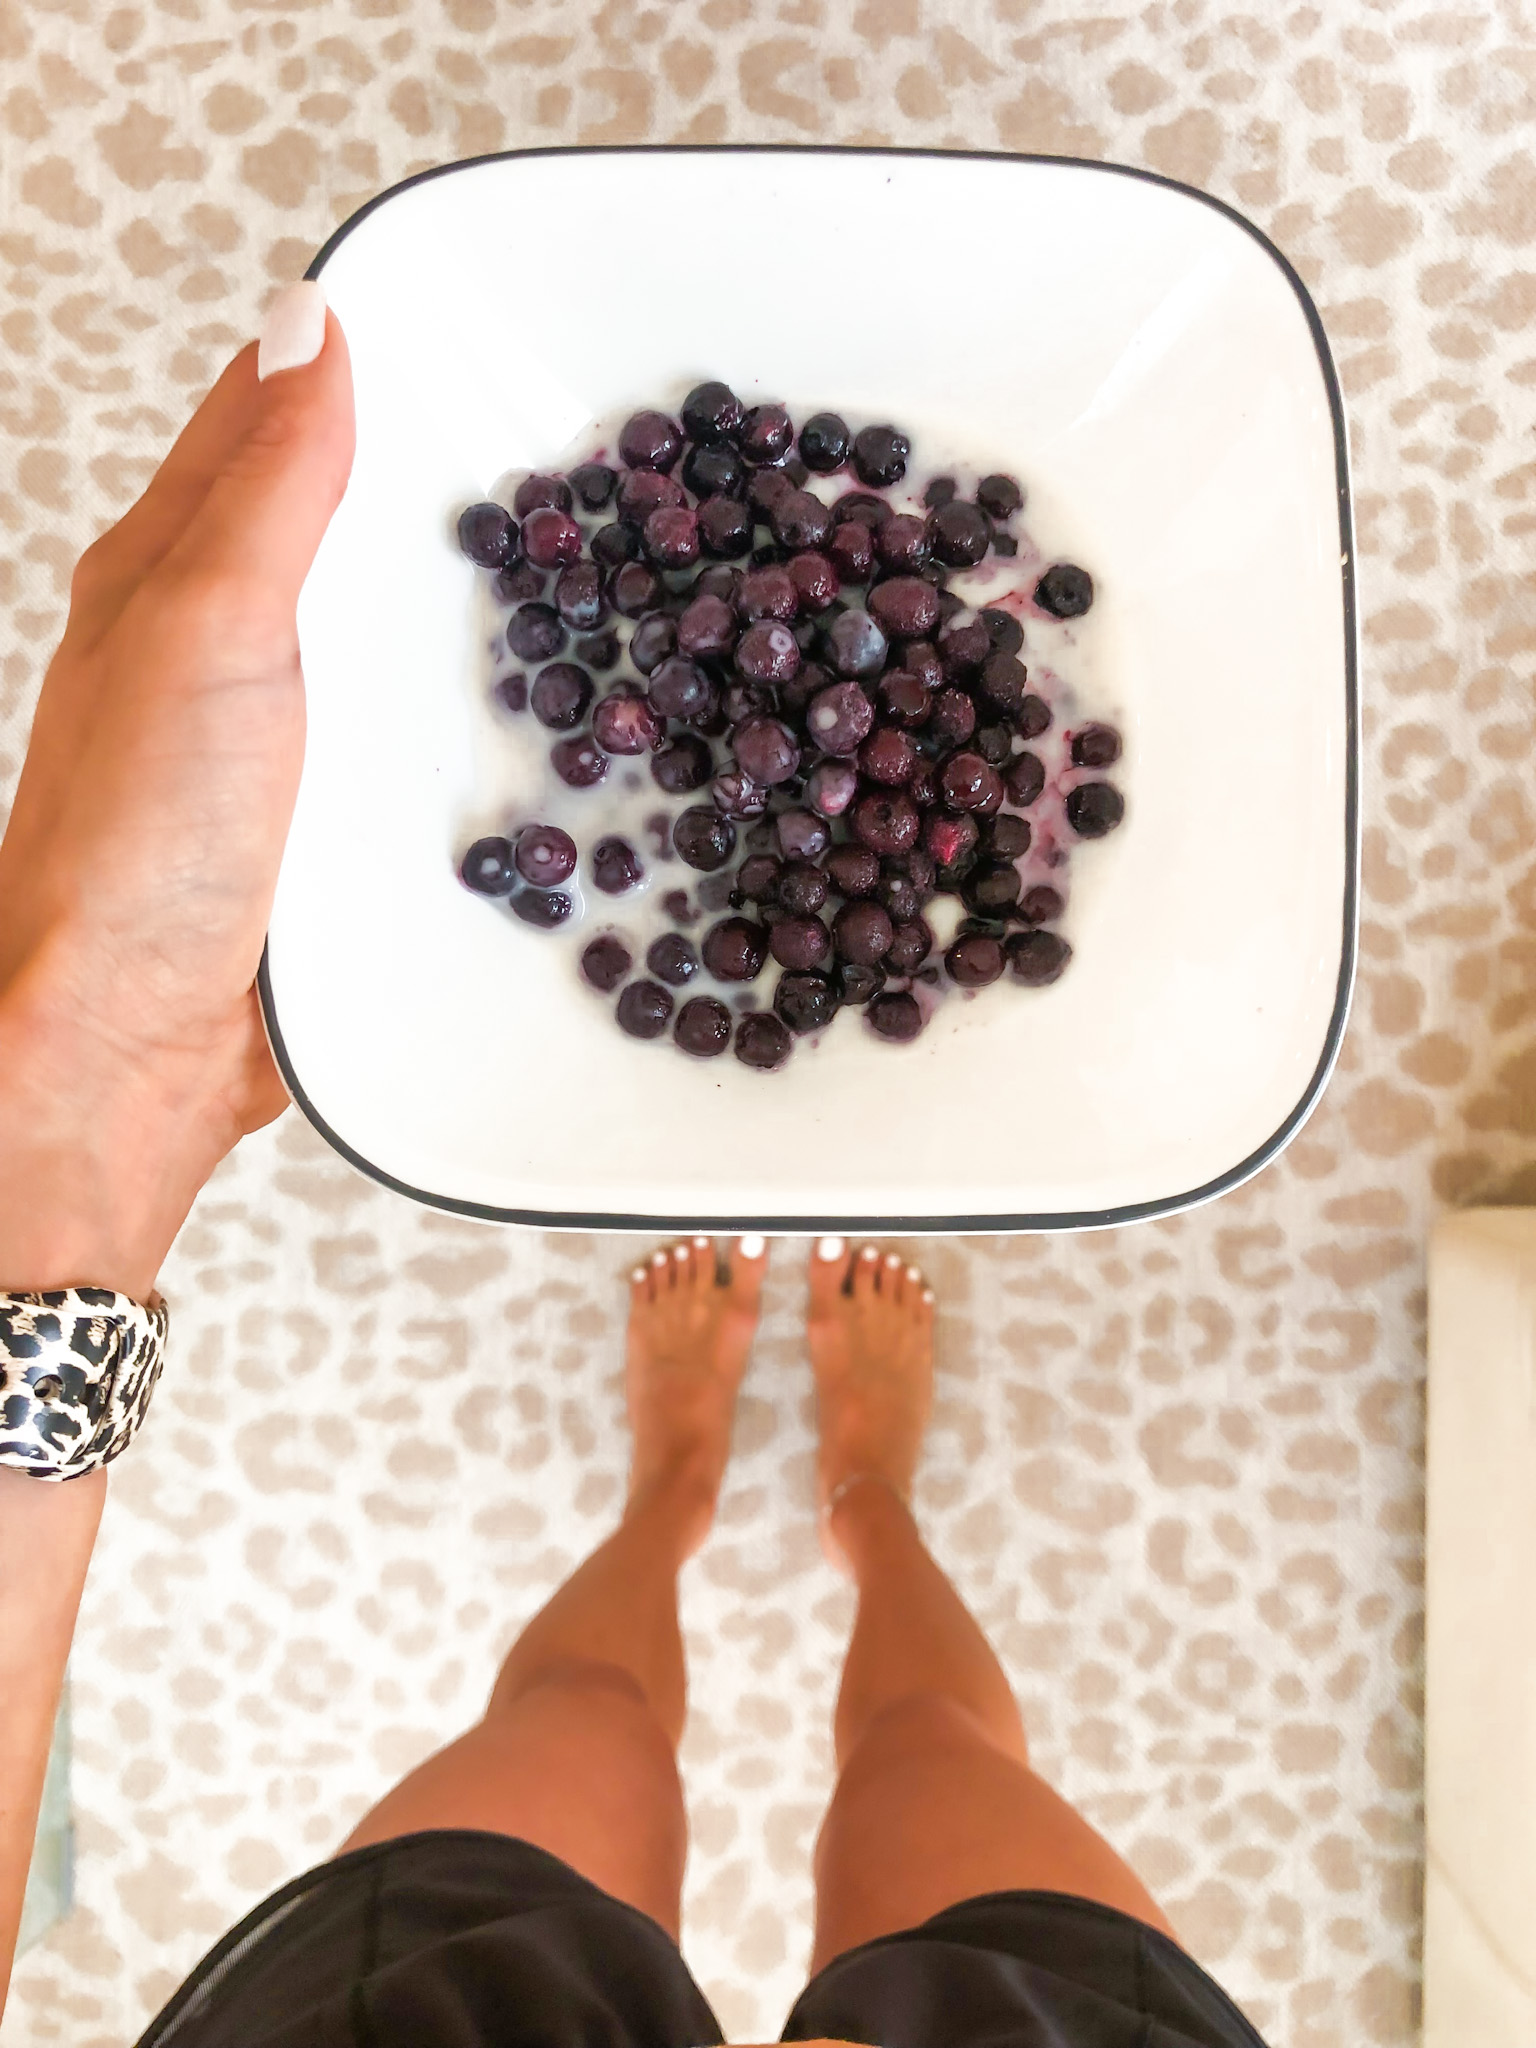 our double dose blueberry mixture: and why we eat wild blueberries daily - medical medium